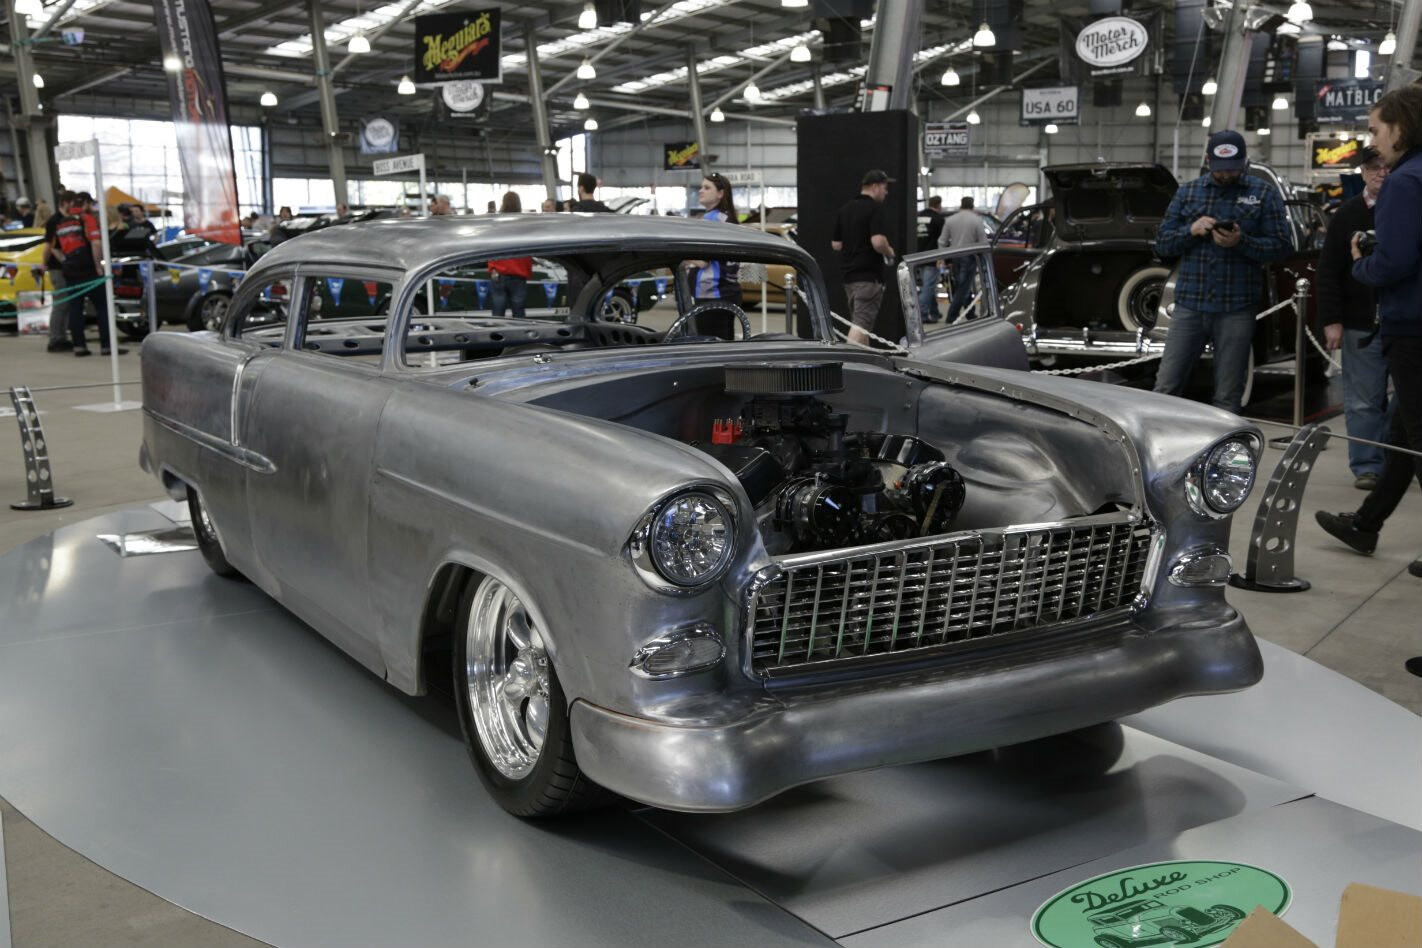 CHOPPED AND SLAMMED ’55 CHEV IN THE BUILD AT MOTOREX